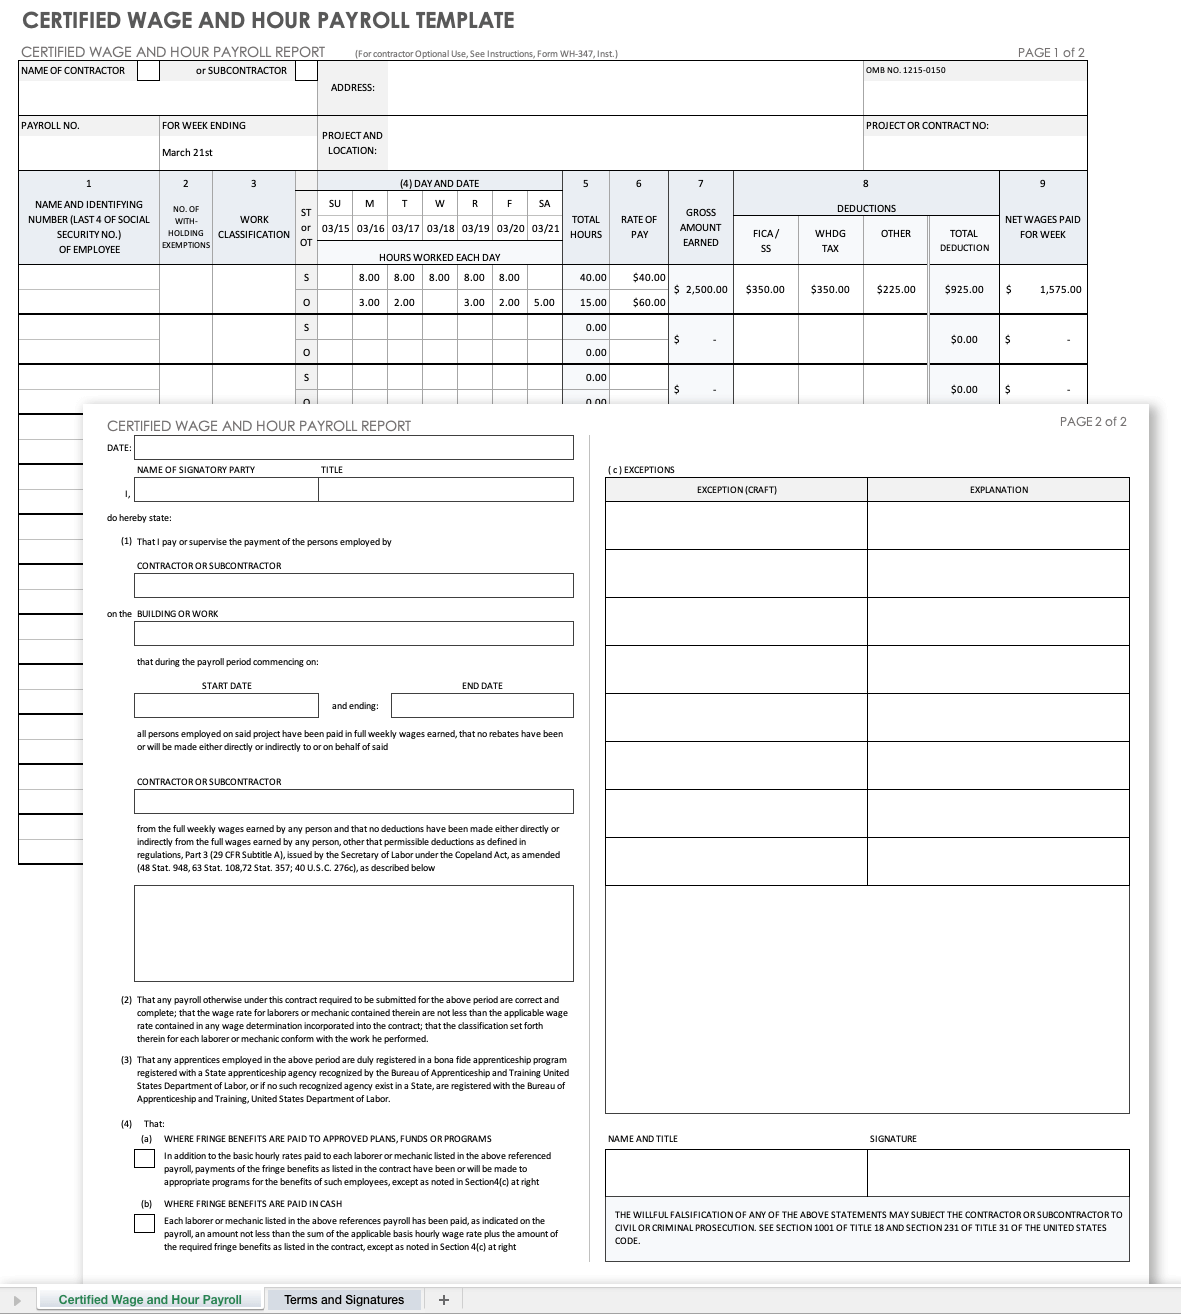 Certified Wage and Hour Payroll Template